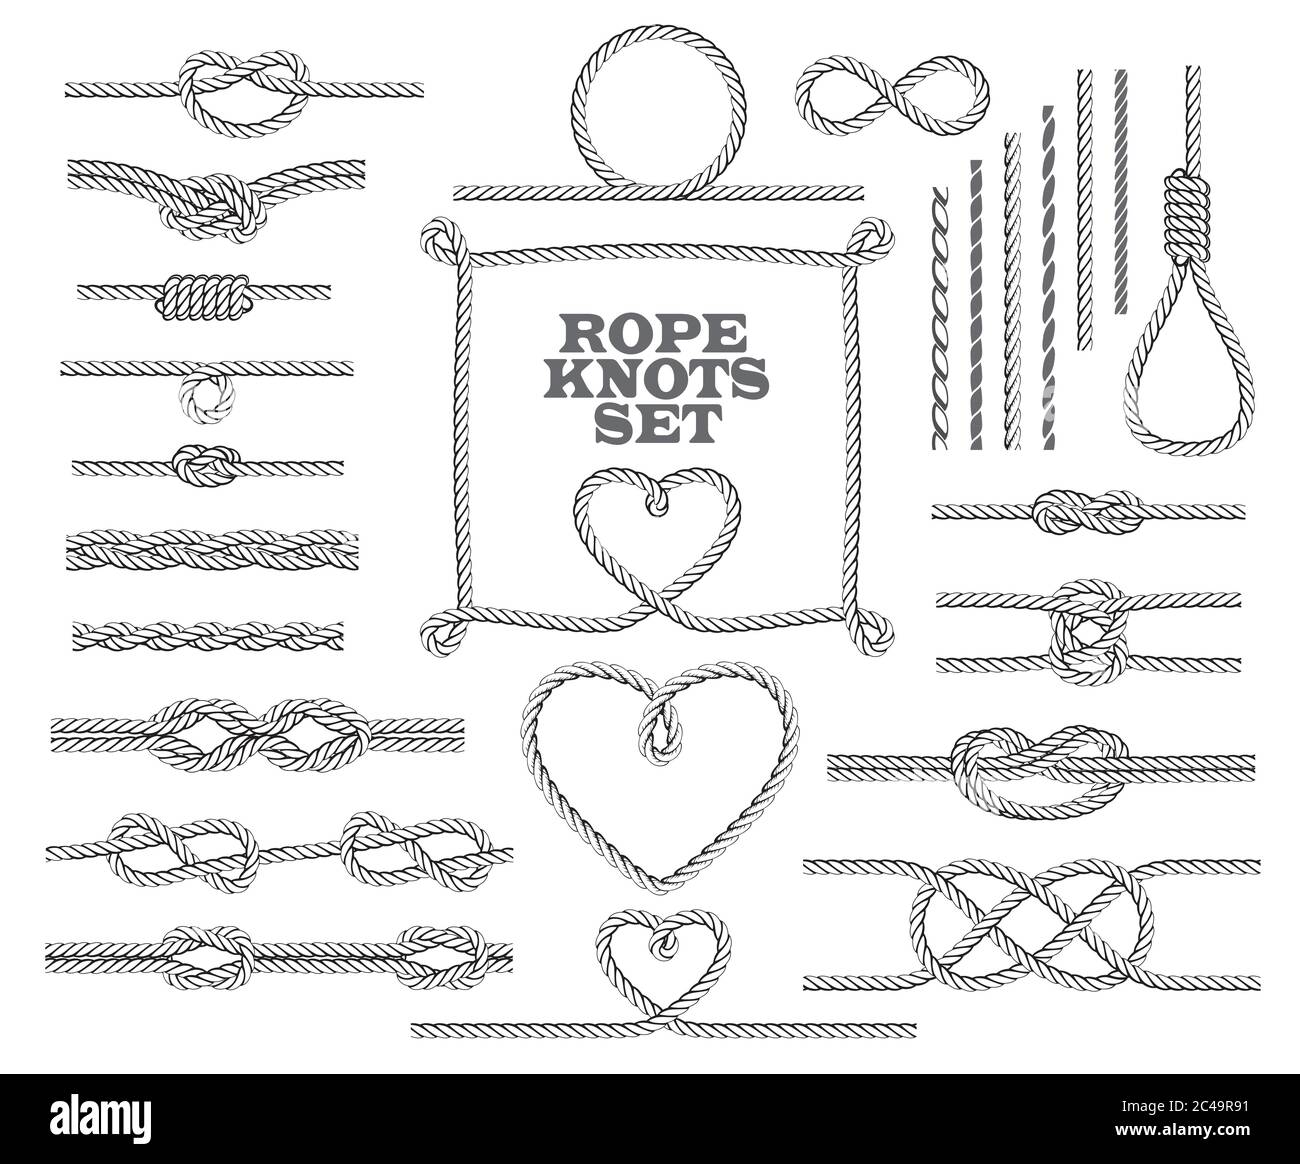 Rope knots collection. Seamless decorative elements. Vector illustration. Stock Vector